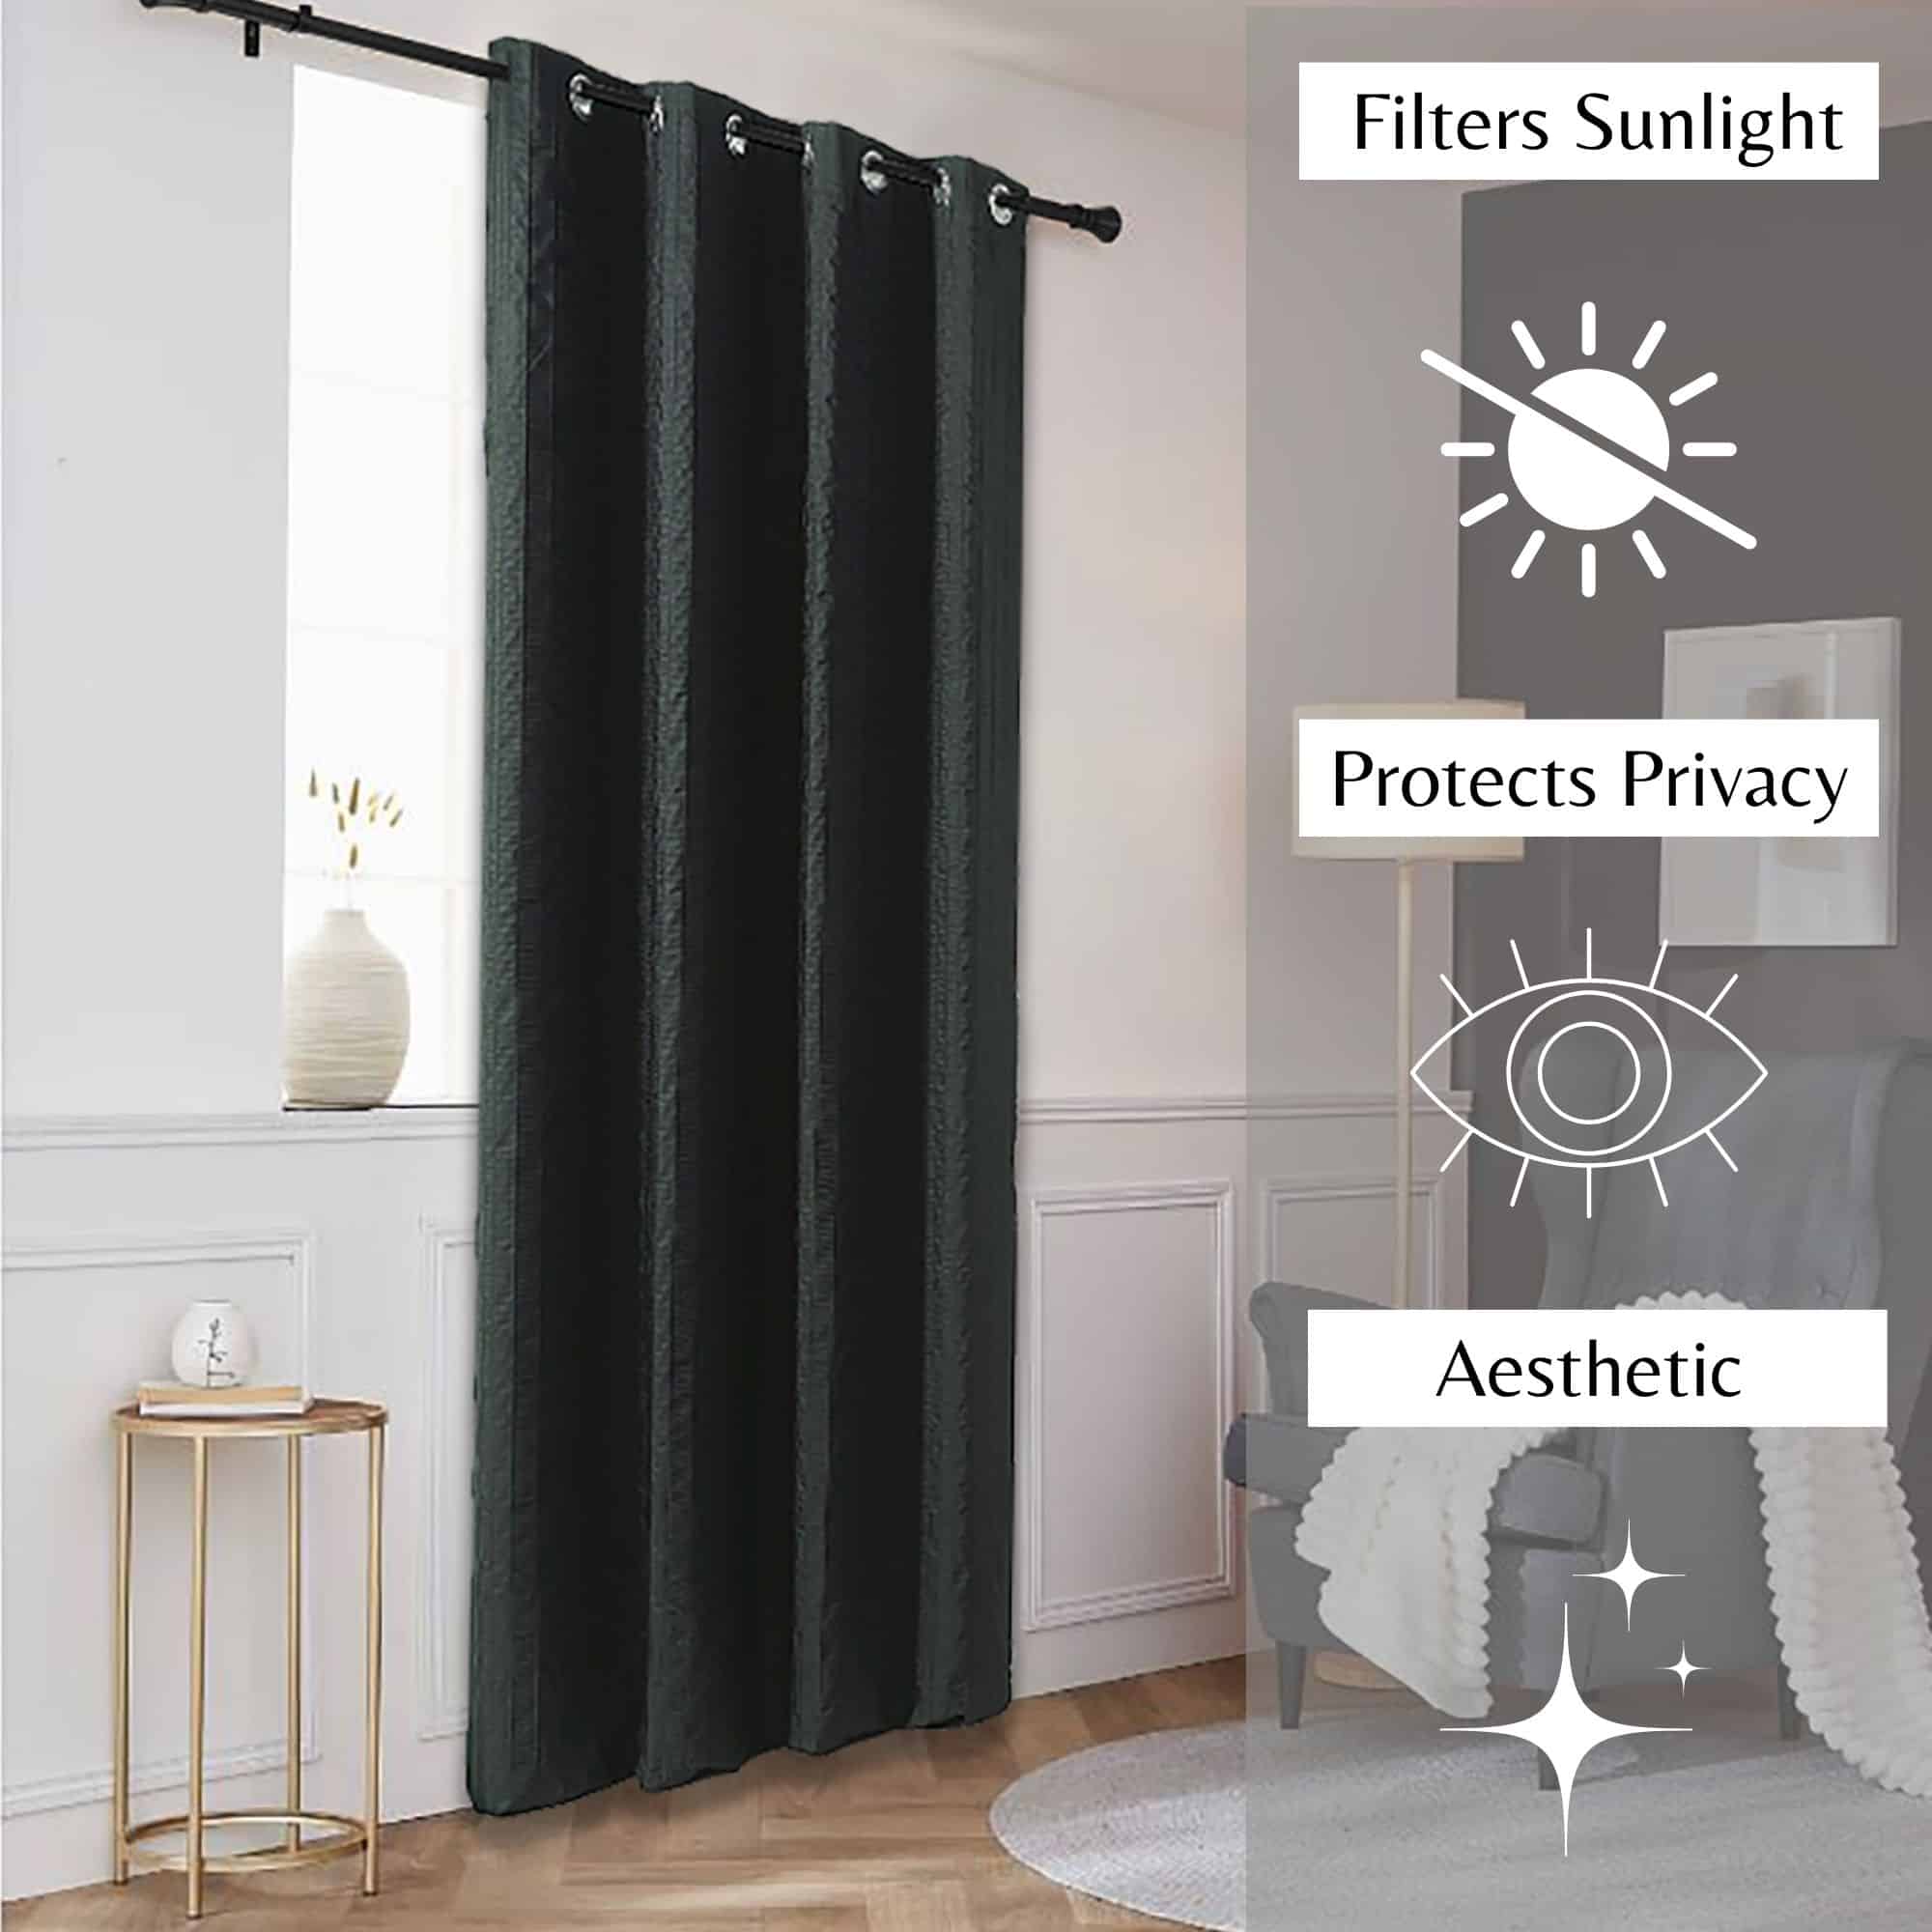 filters sunlight protects privacy aesthetic curtain panel for interior design